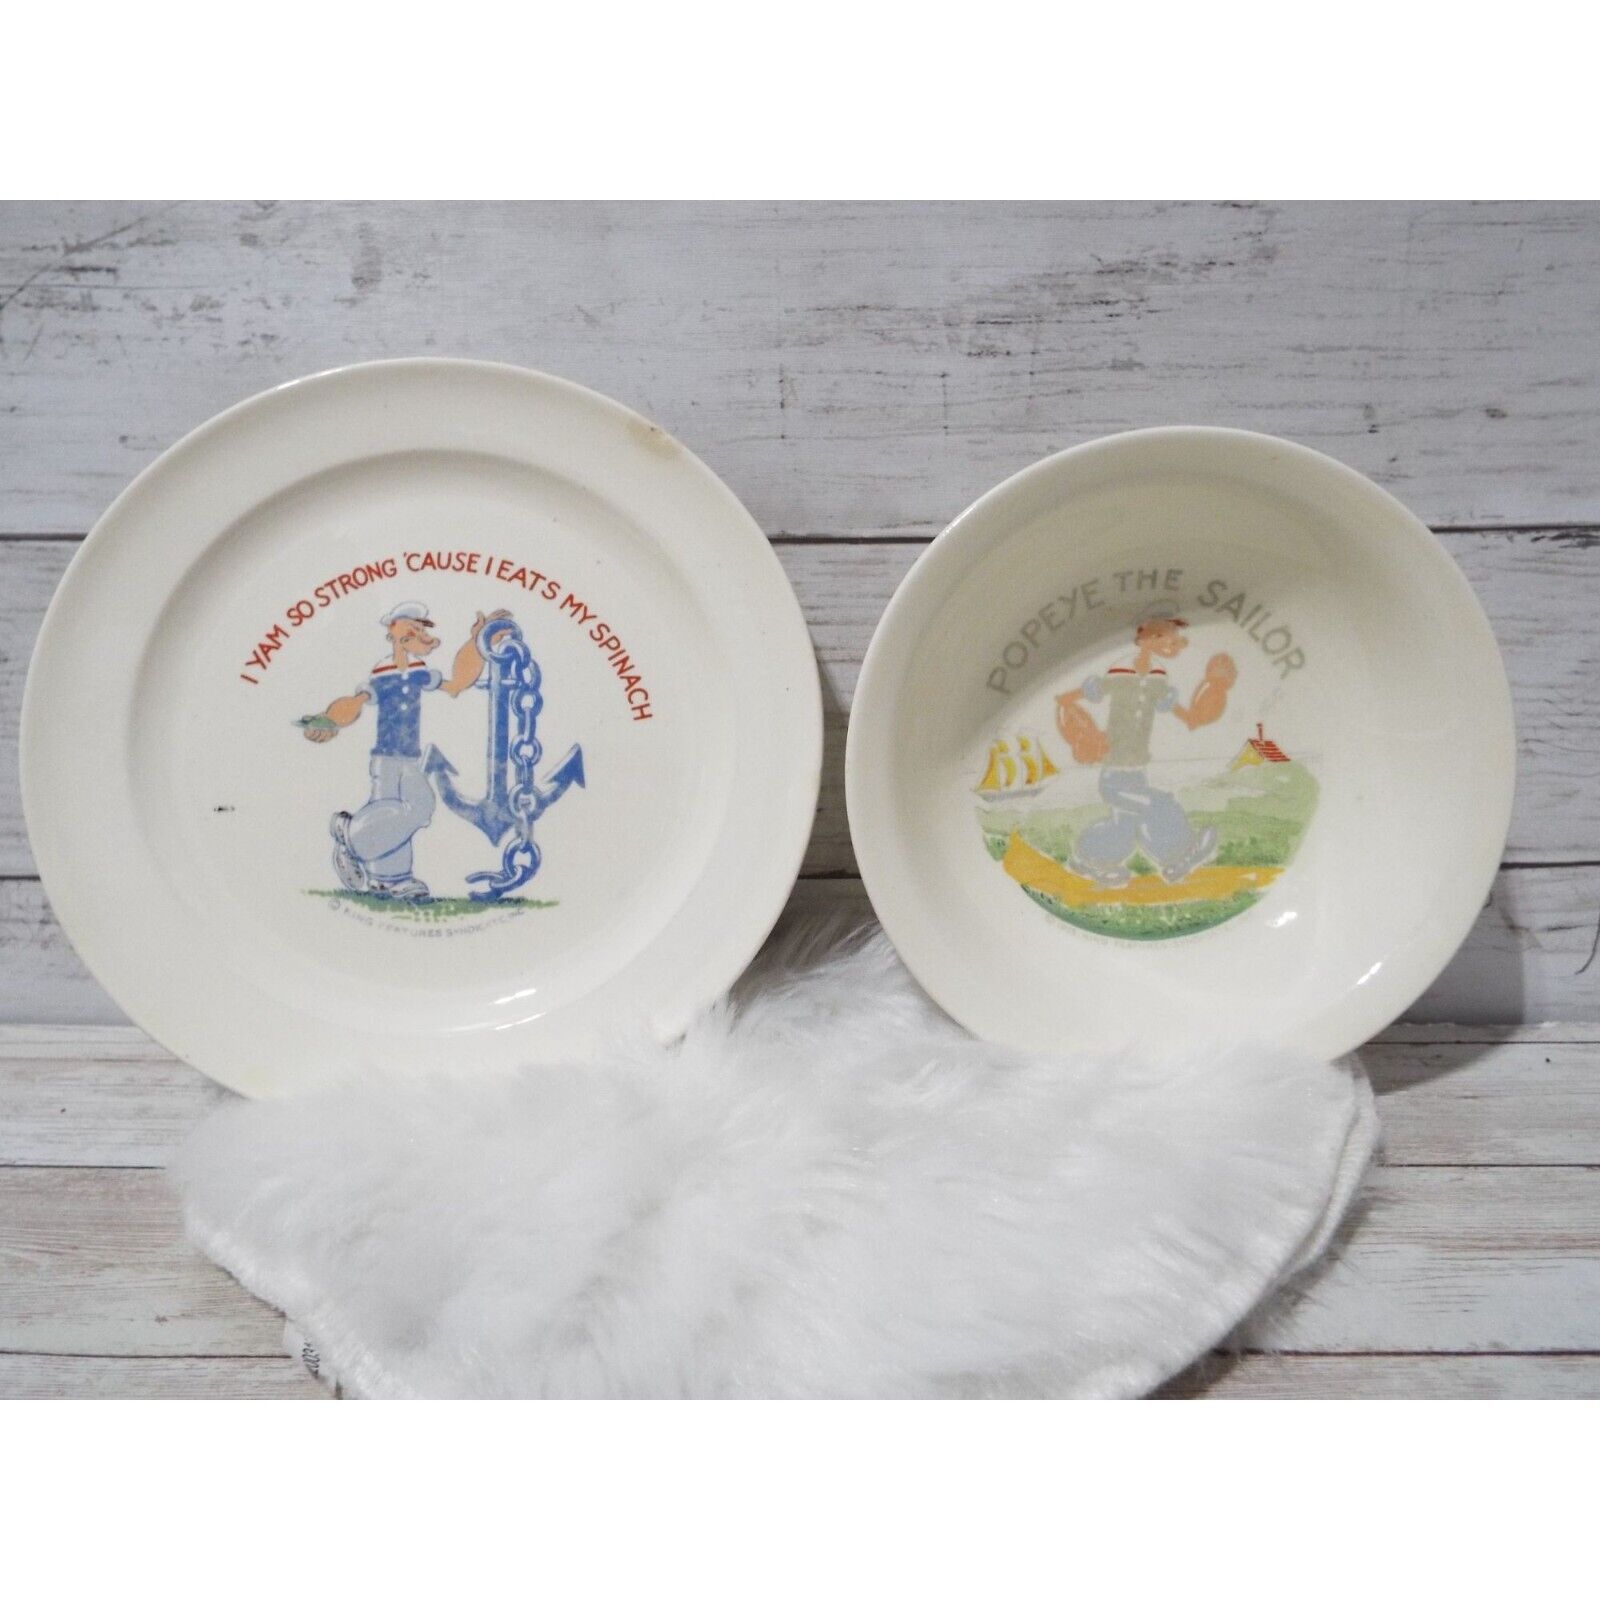 Vintage Popeye the Sailor Ceramic Plate and Bowl See Description